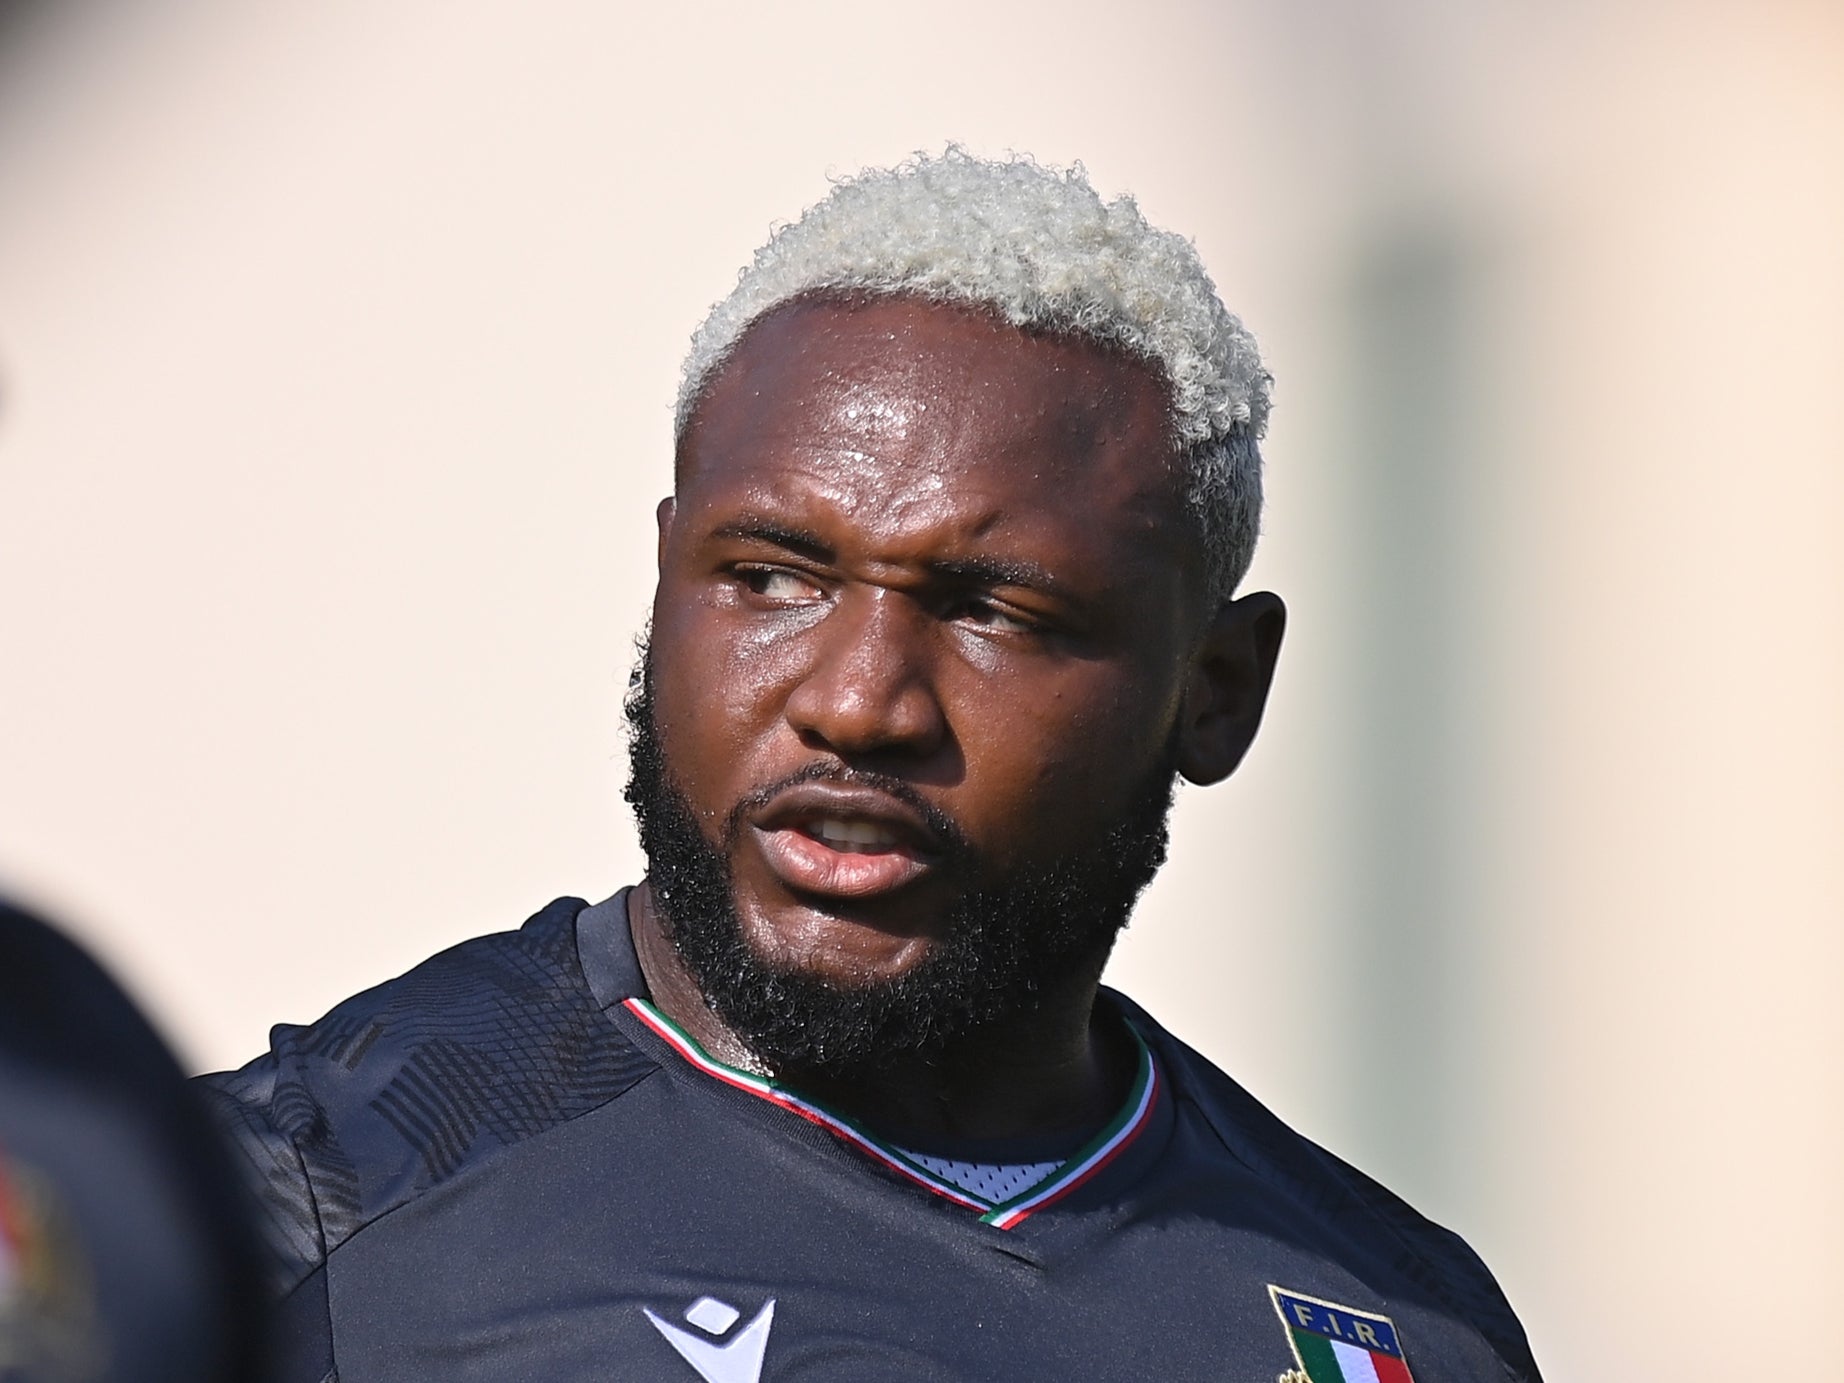 Benetton and Italy prop Traore was given a rotten banana in the club’s Secret Santa